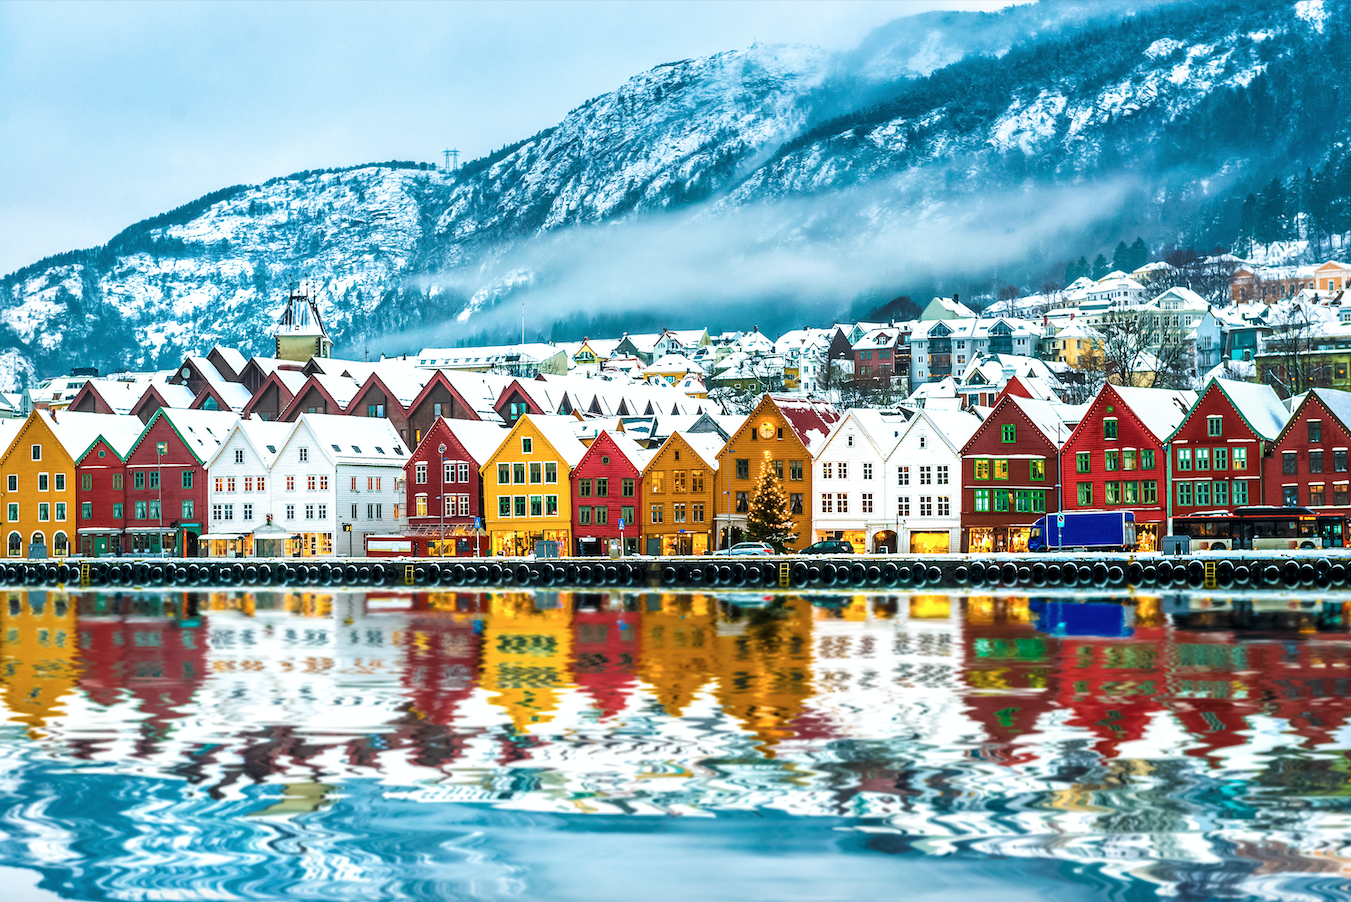 View from a lake on historic and colorful Bergen buildings in winter.